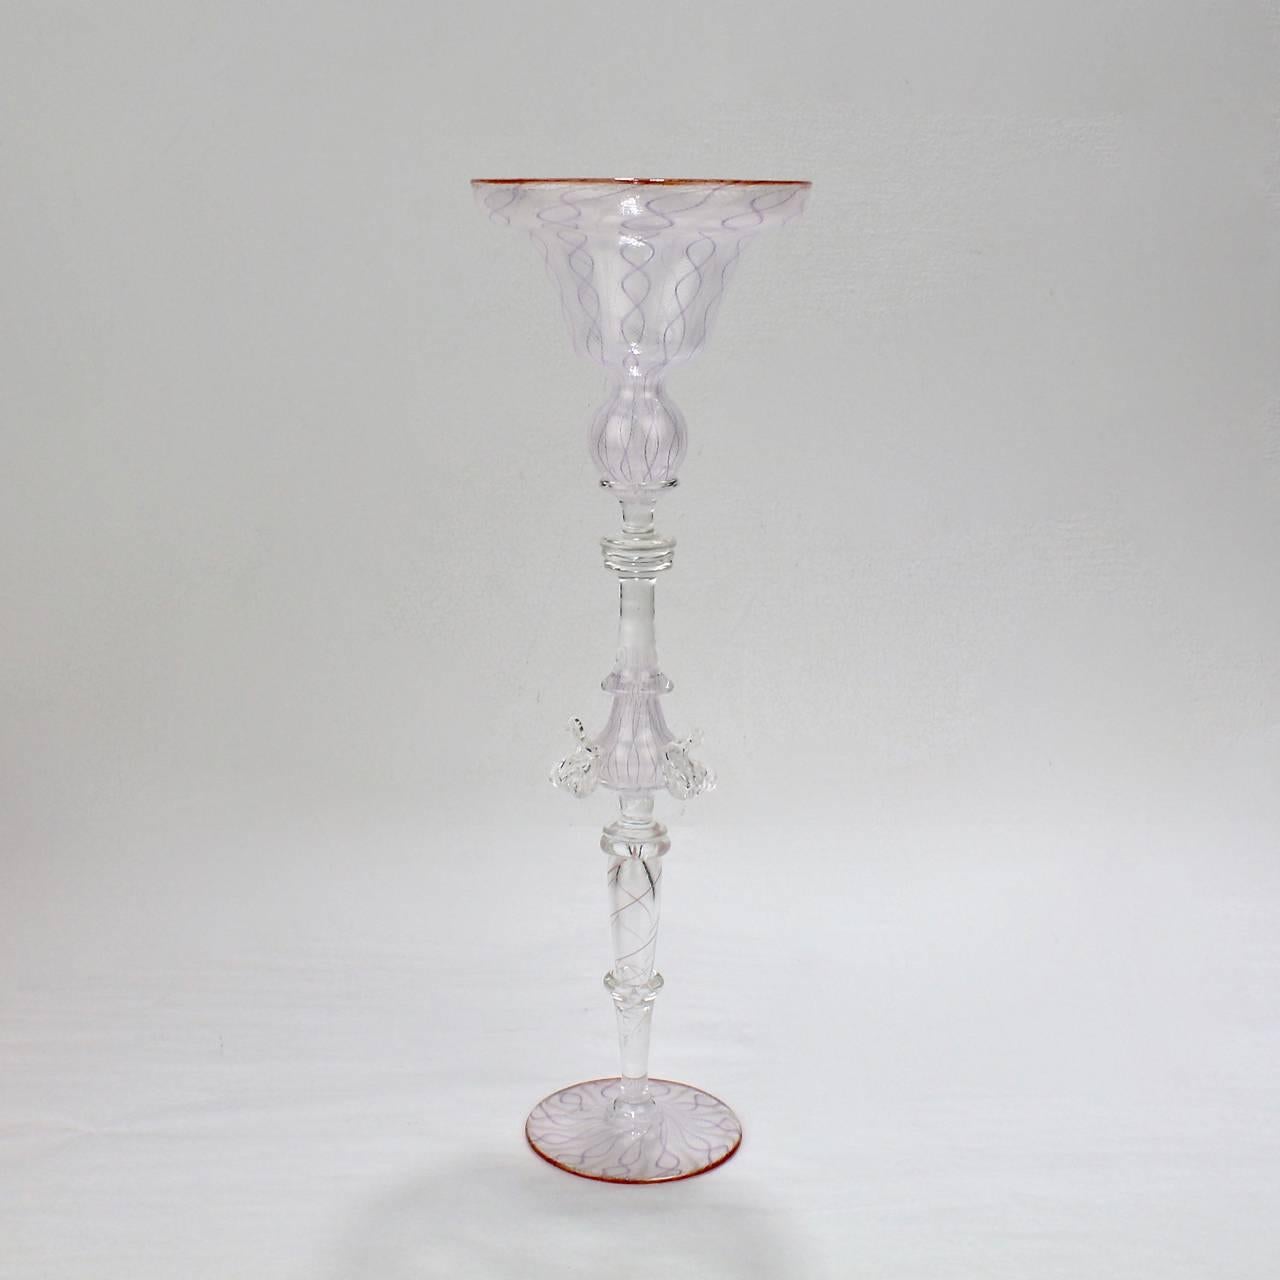 A tall, white zanfirico glass goblet by Charles Paul Savoie.

Savoie's work is inspired by the elaborate Venetian glass of the 17th century. 

His work is widely held in public and private collection, including in the Renwick Gallery of American